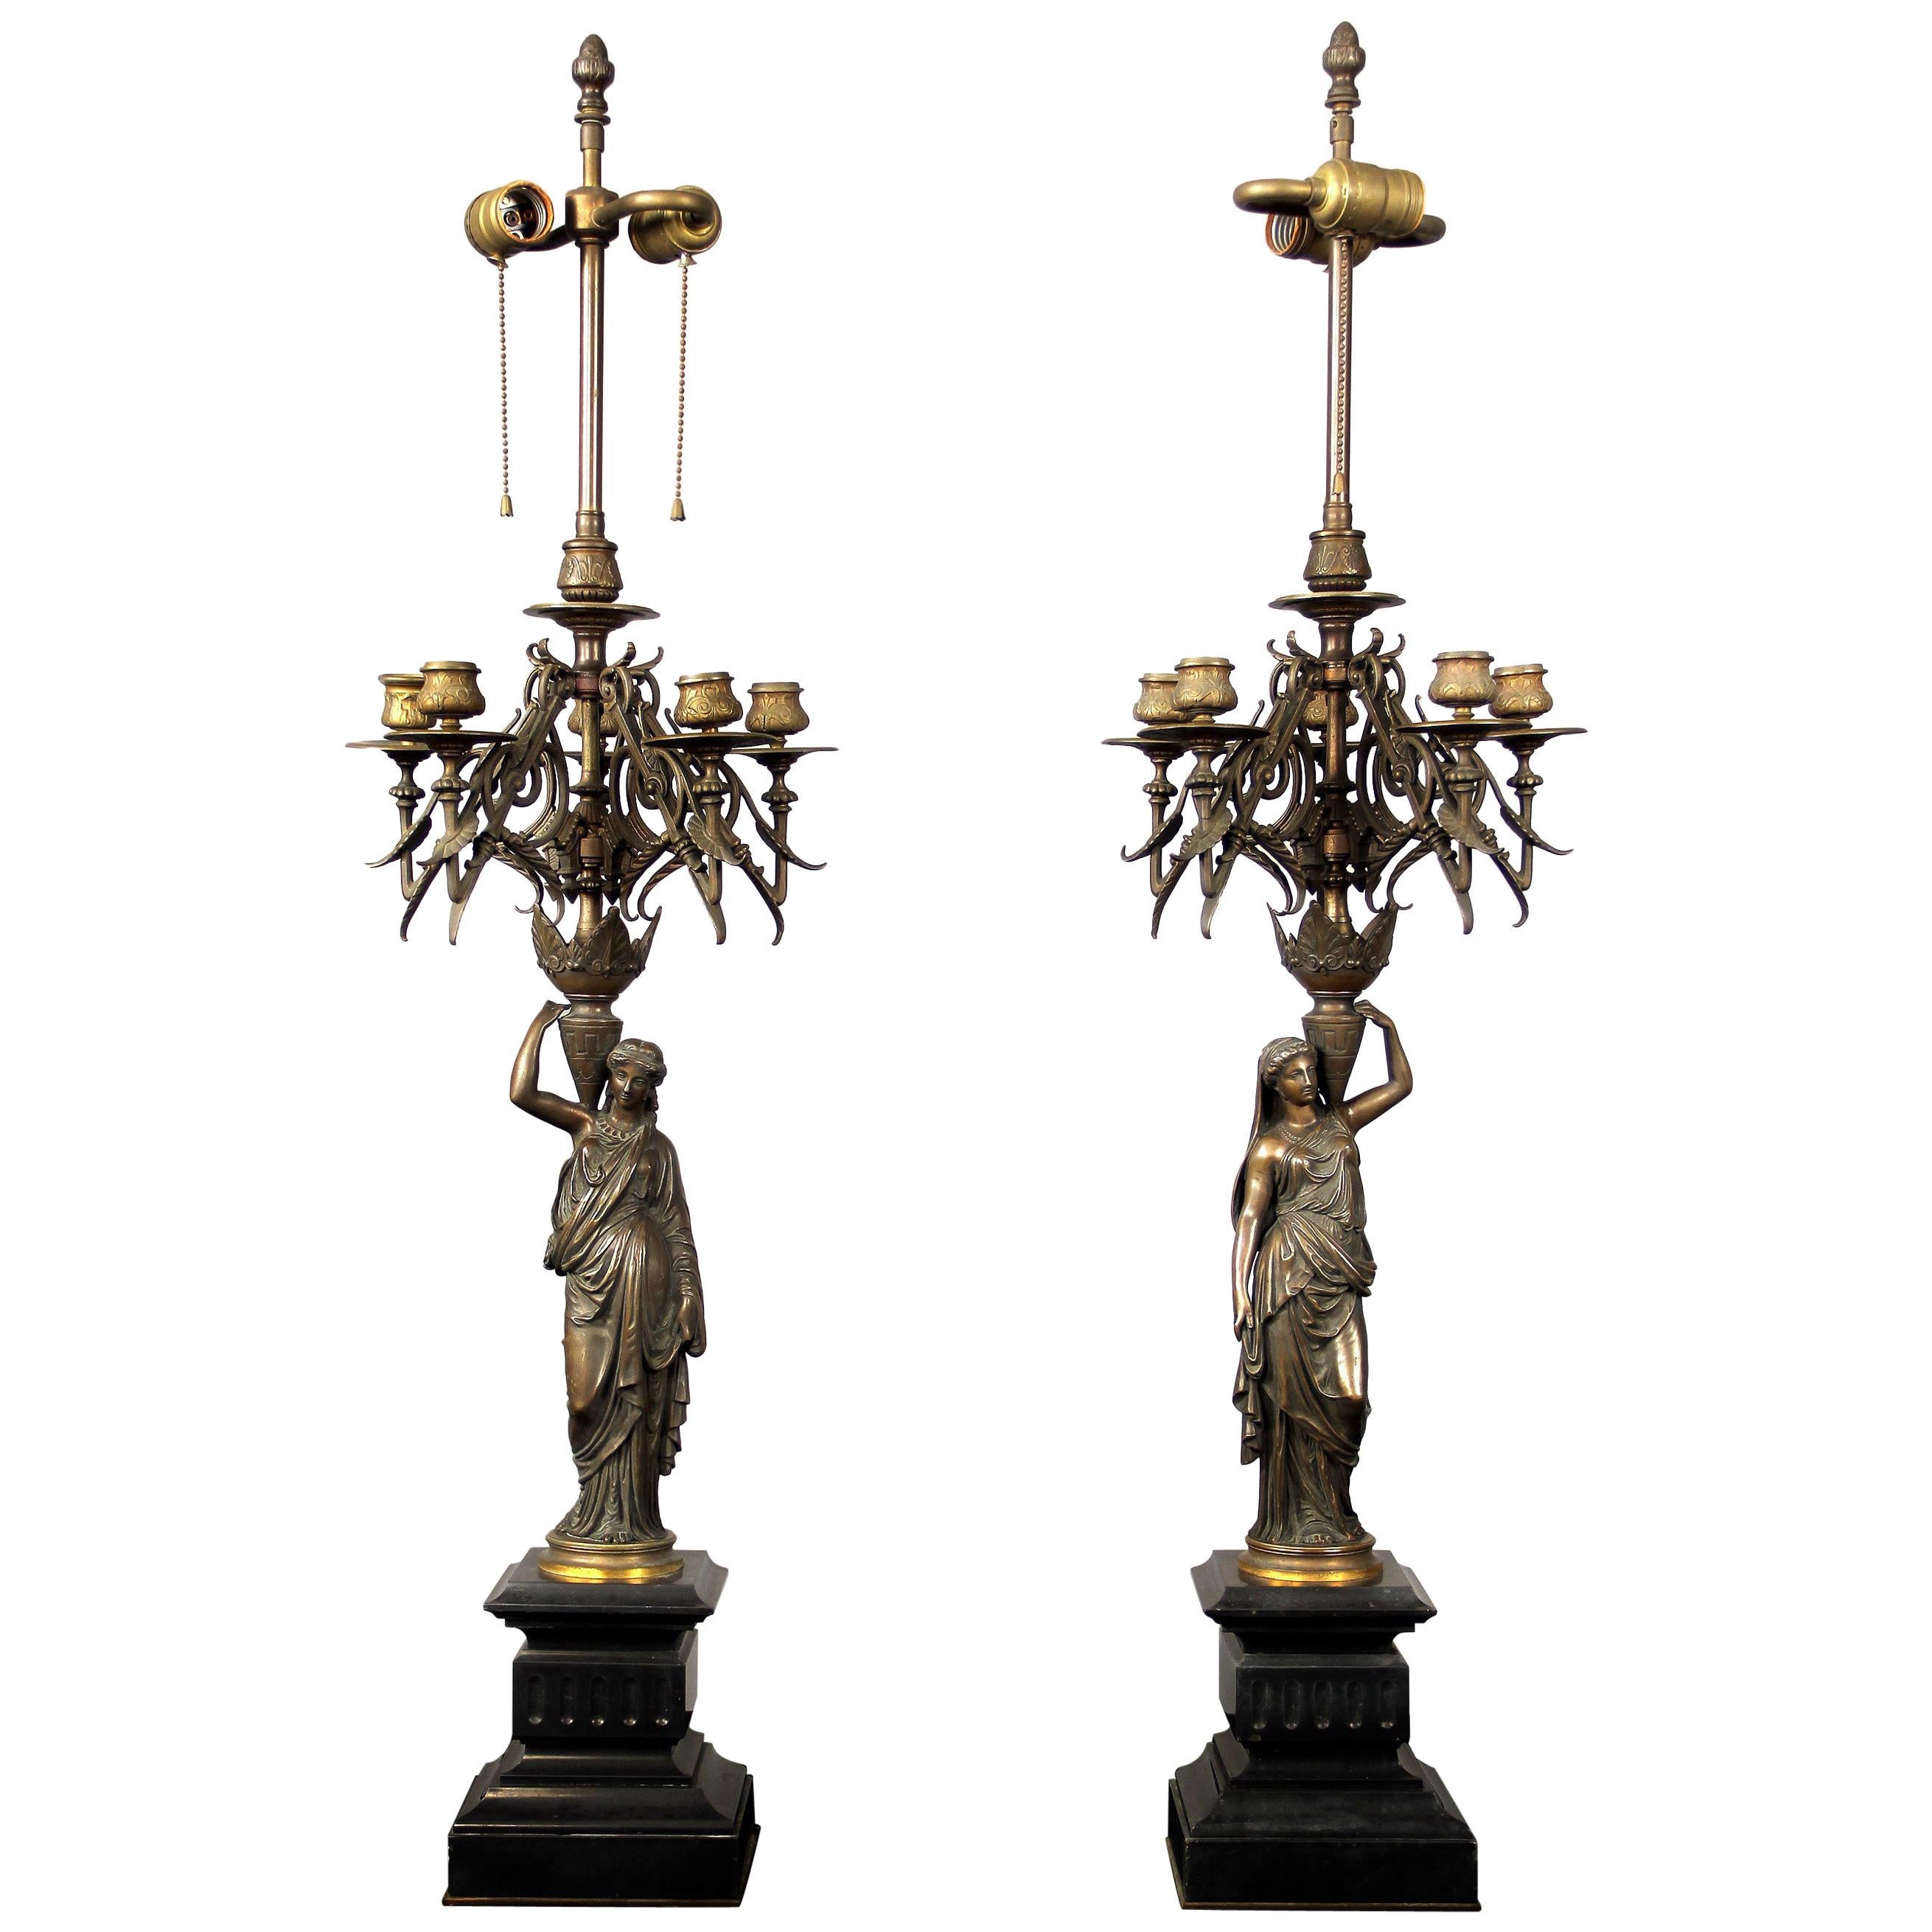 Nice Pair of Late 19th Century Patina Bronze Figural Candelabra Lamps